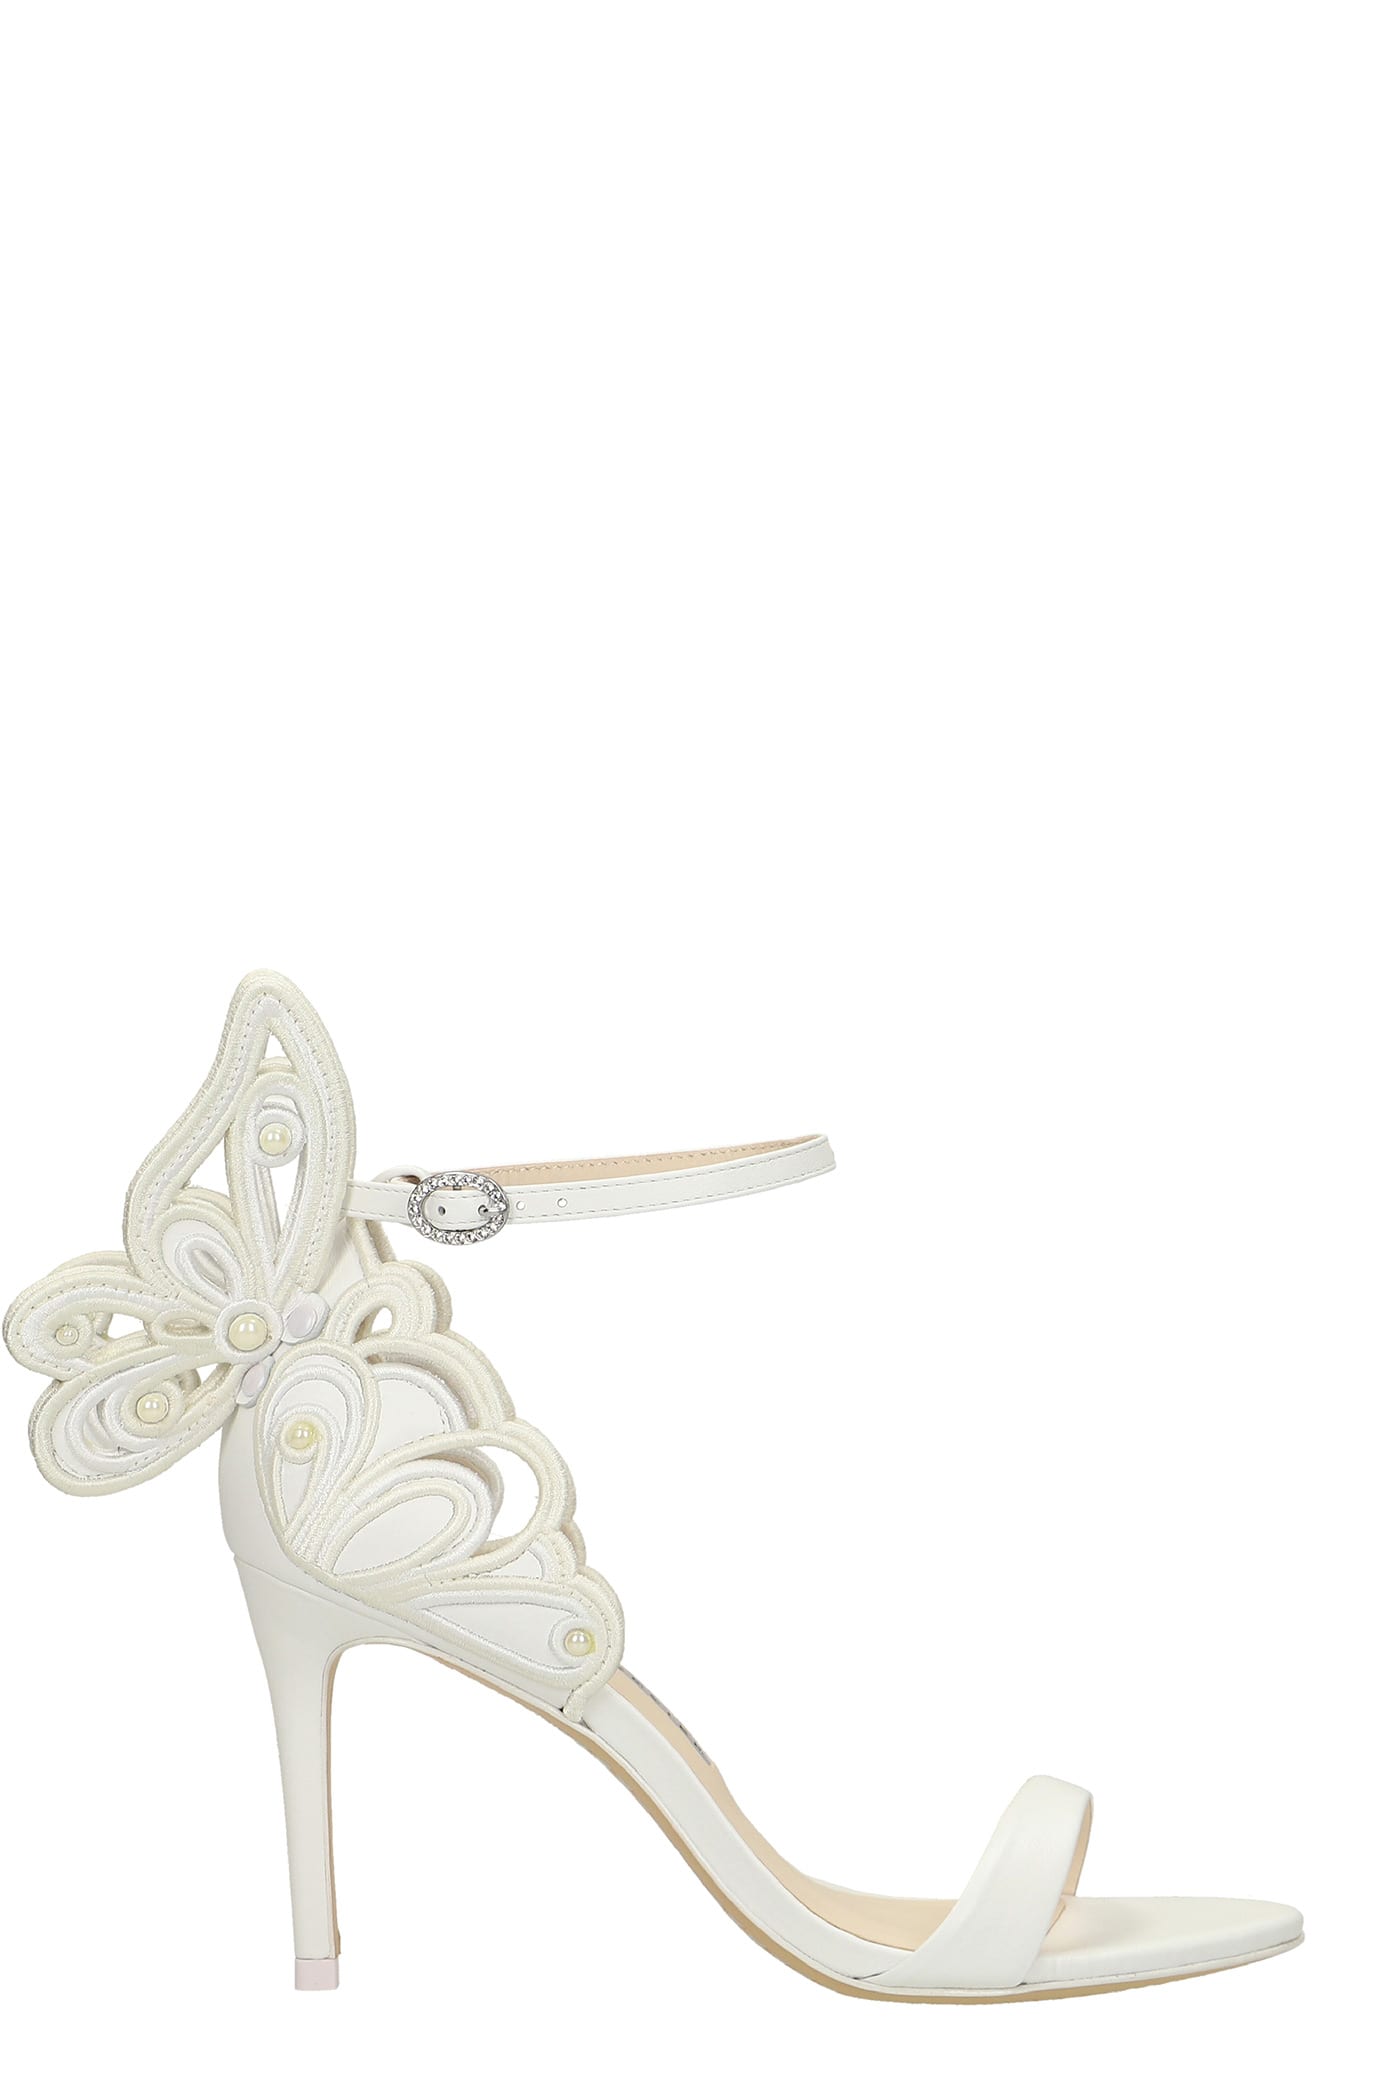 Sophia Webster Chiara Mid Sandals In White Leather